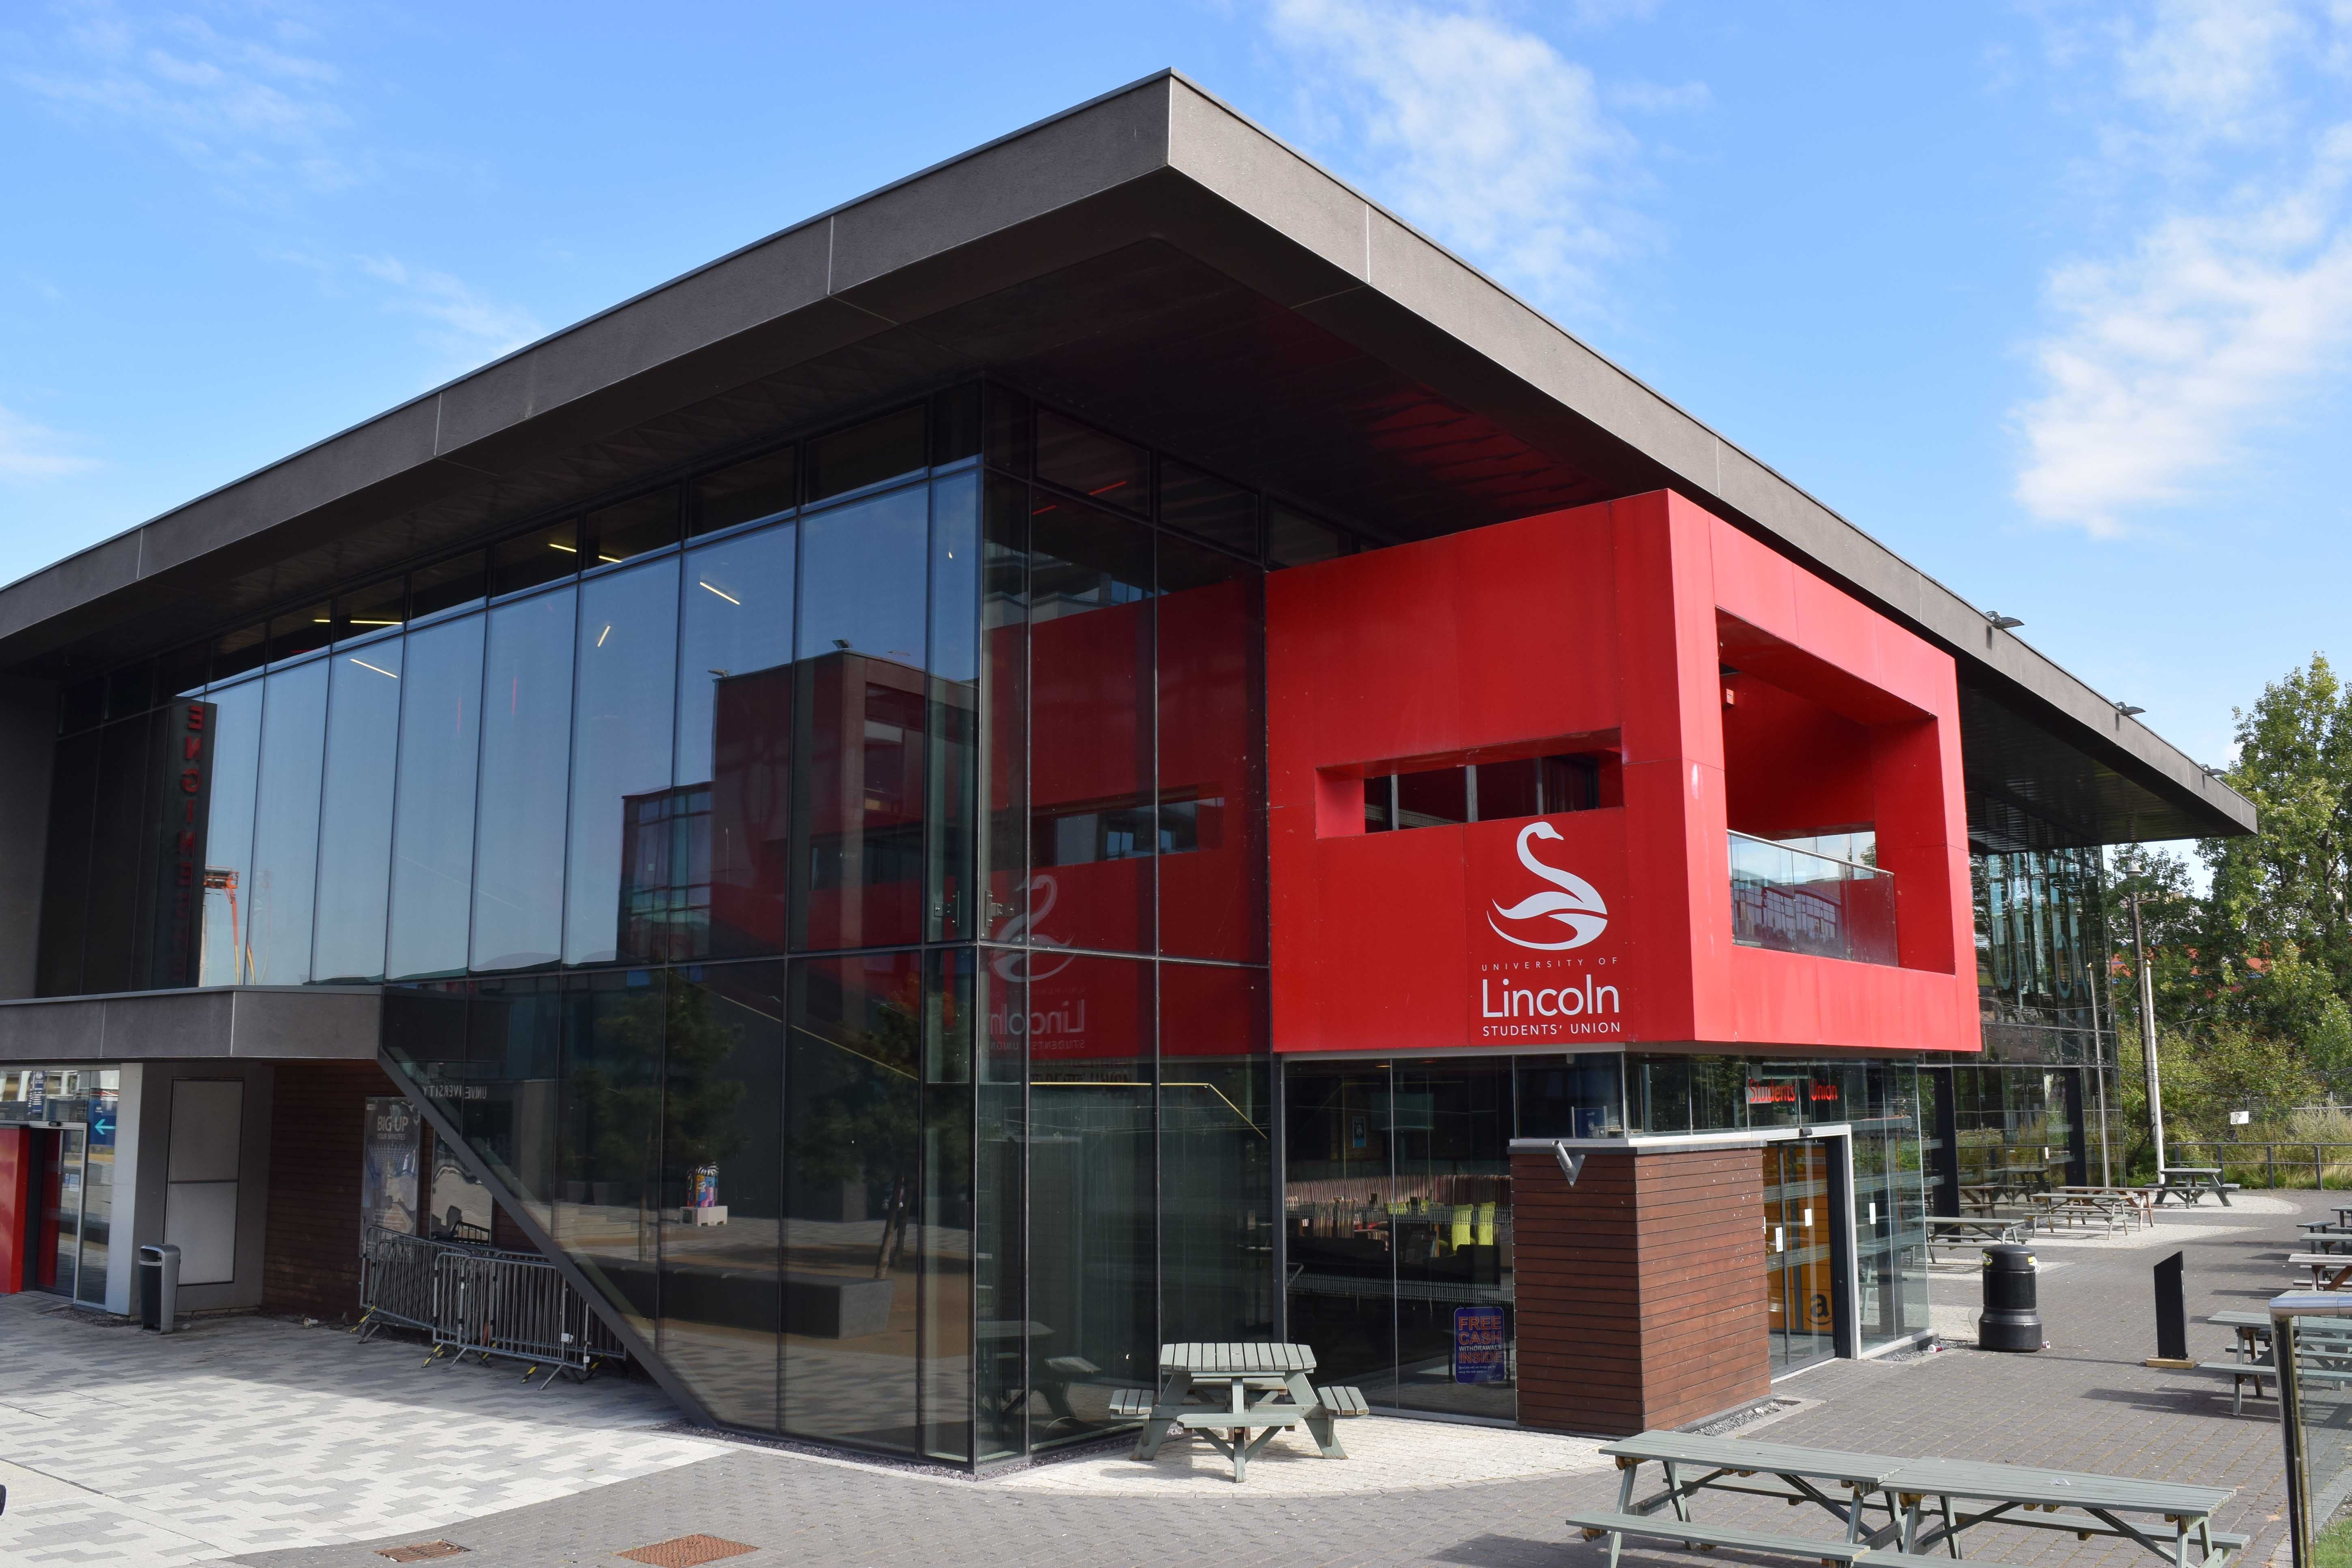 Image of a building with a glass wall and red platform